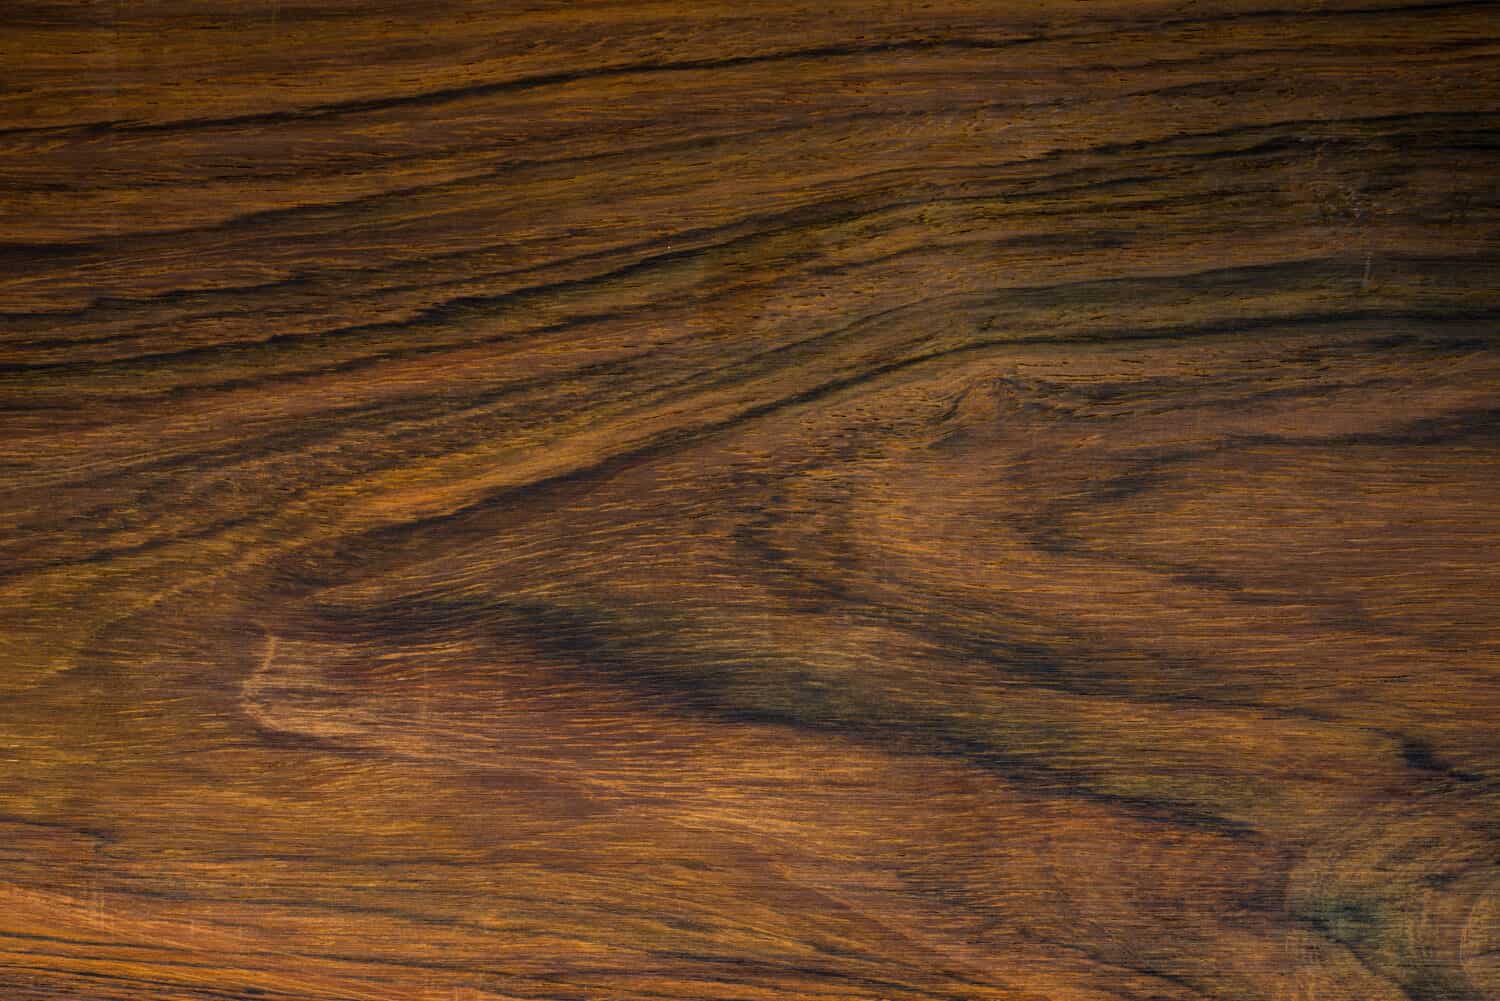 Texture of Brazilian Rosewood, Endangered Species of Wild Flora, used as background